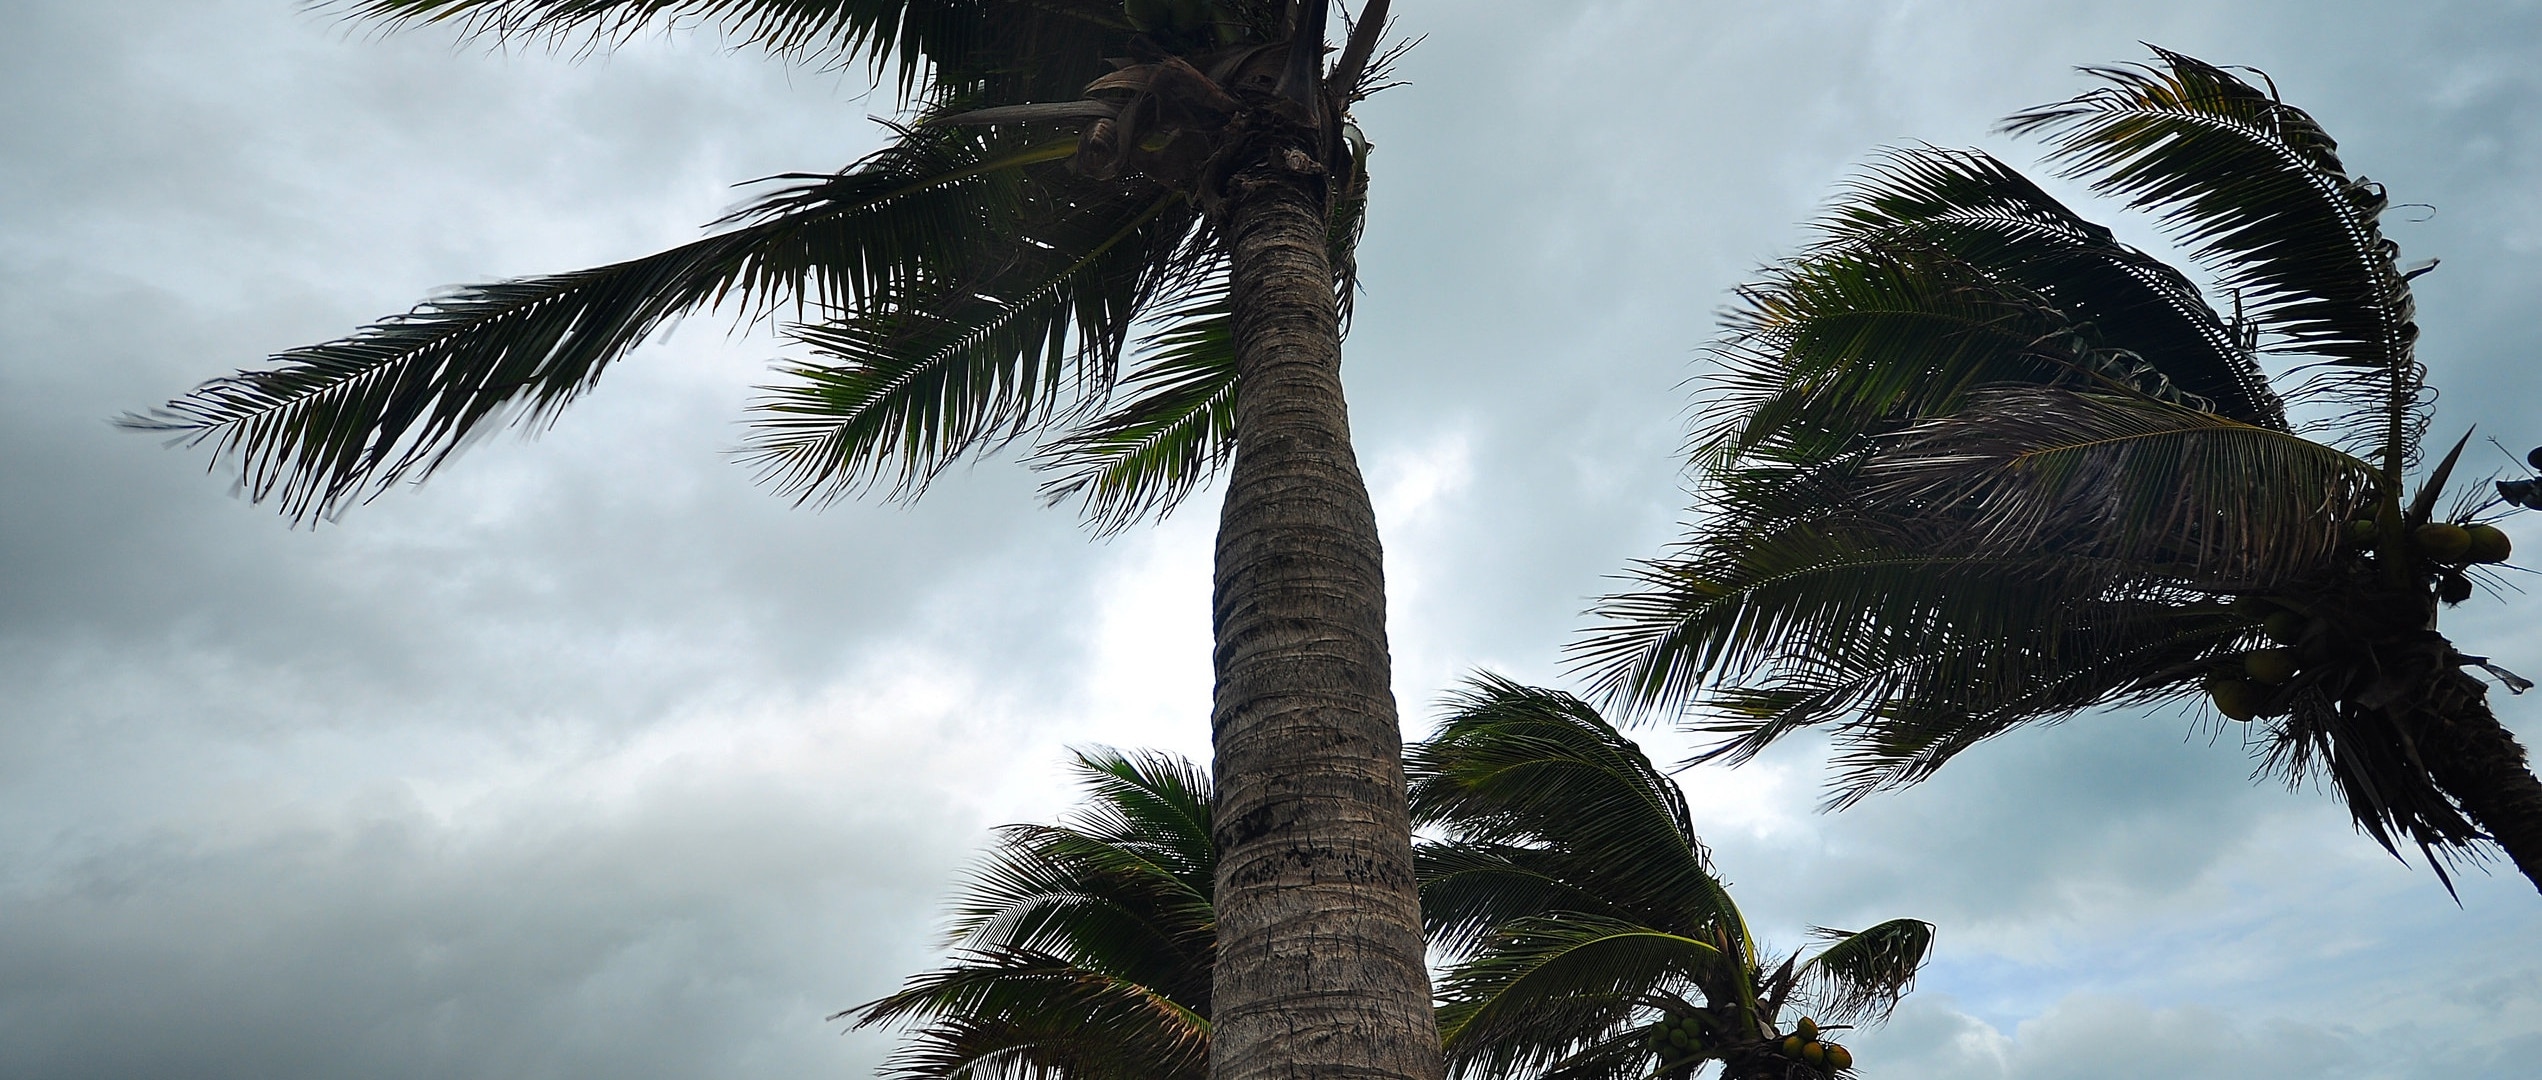 Palm trees blowing in hurricane winds